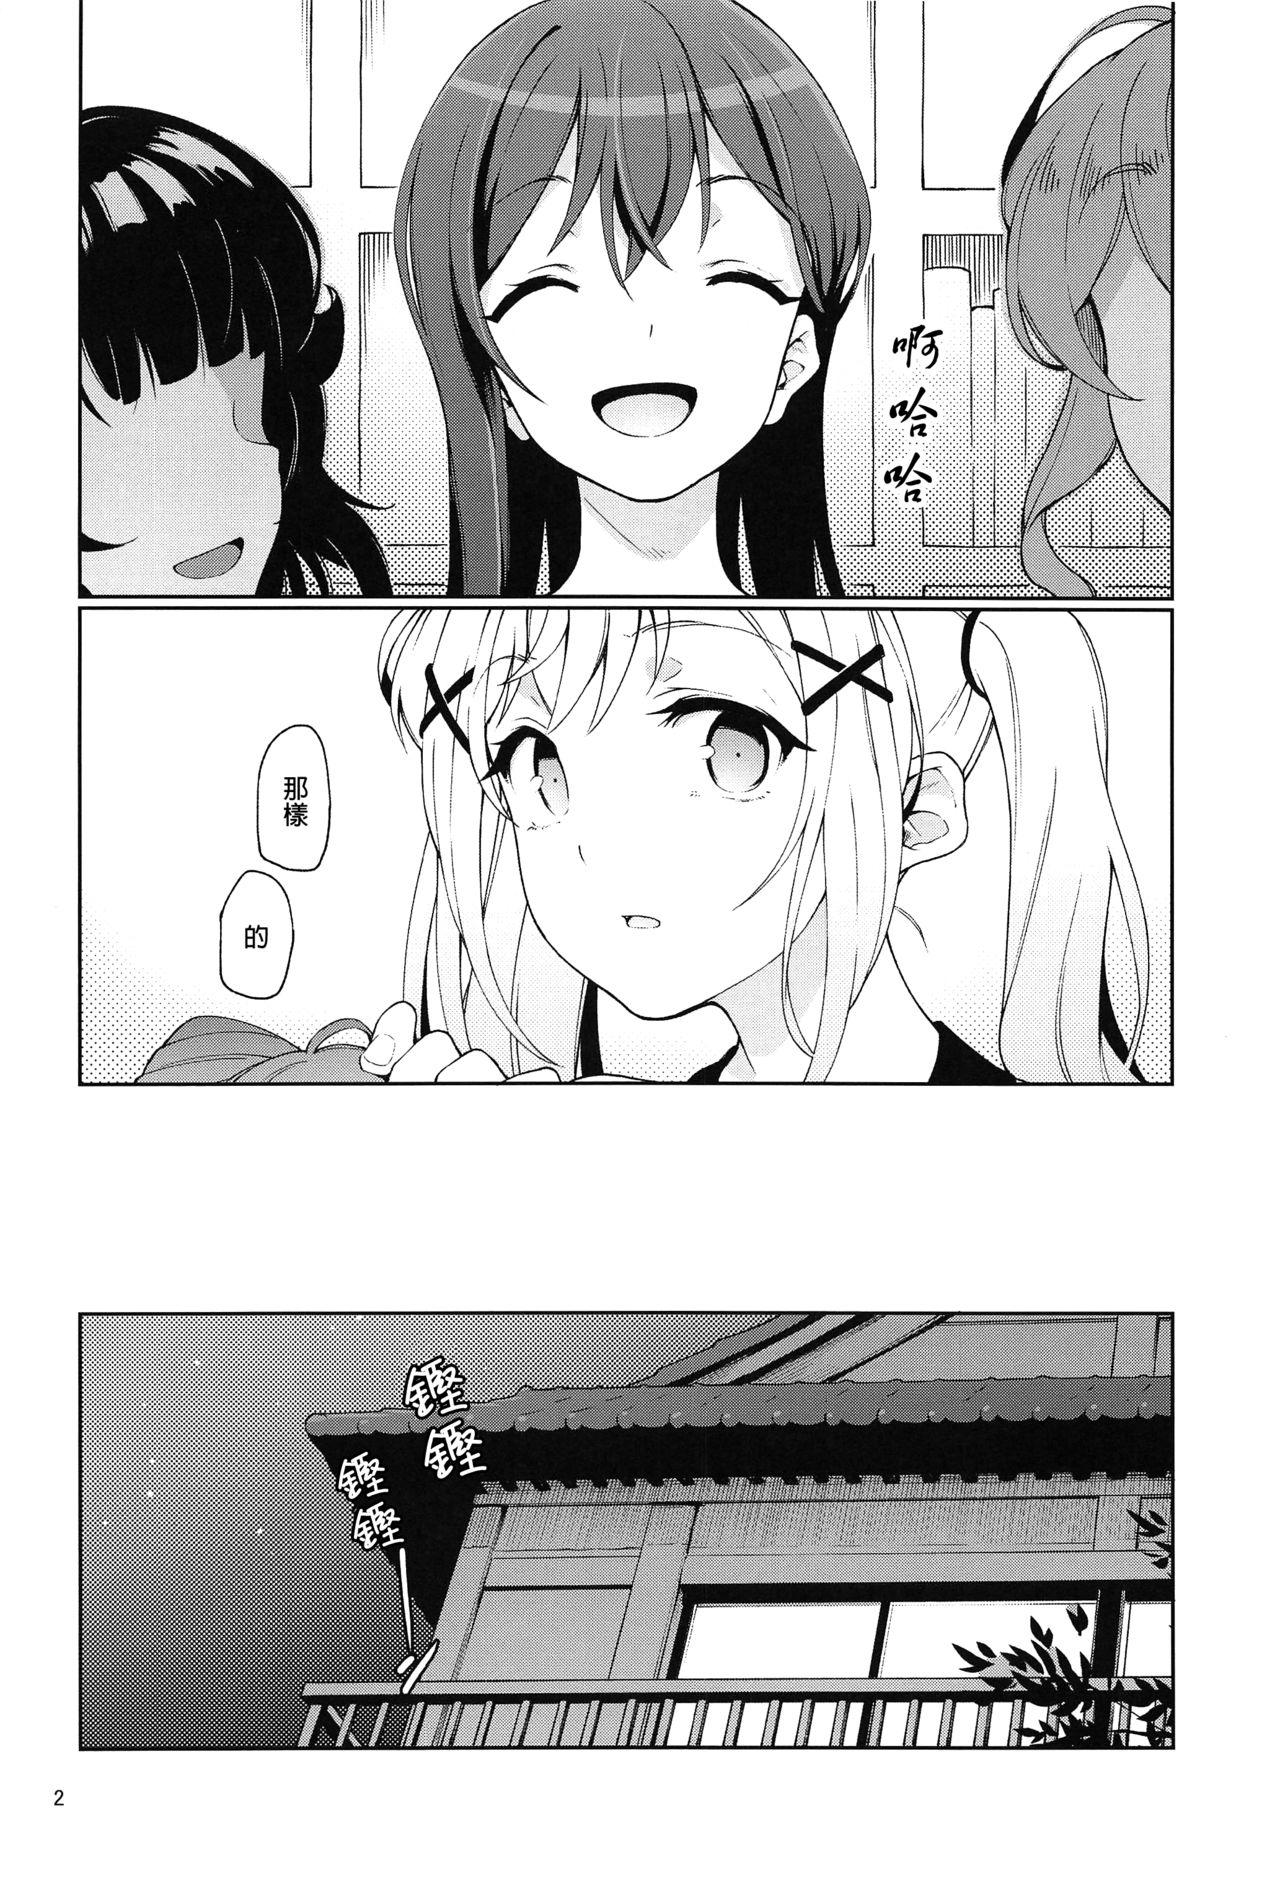 Thong Jealousy All Night - Bang dream Deutsche - Page 4